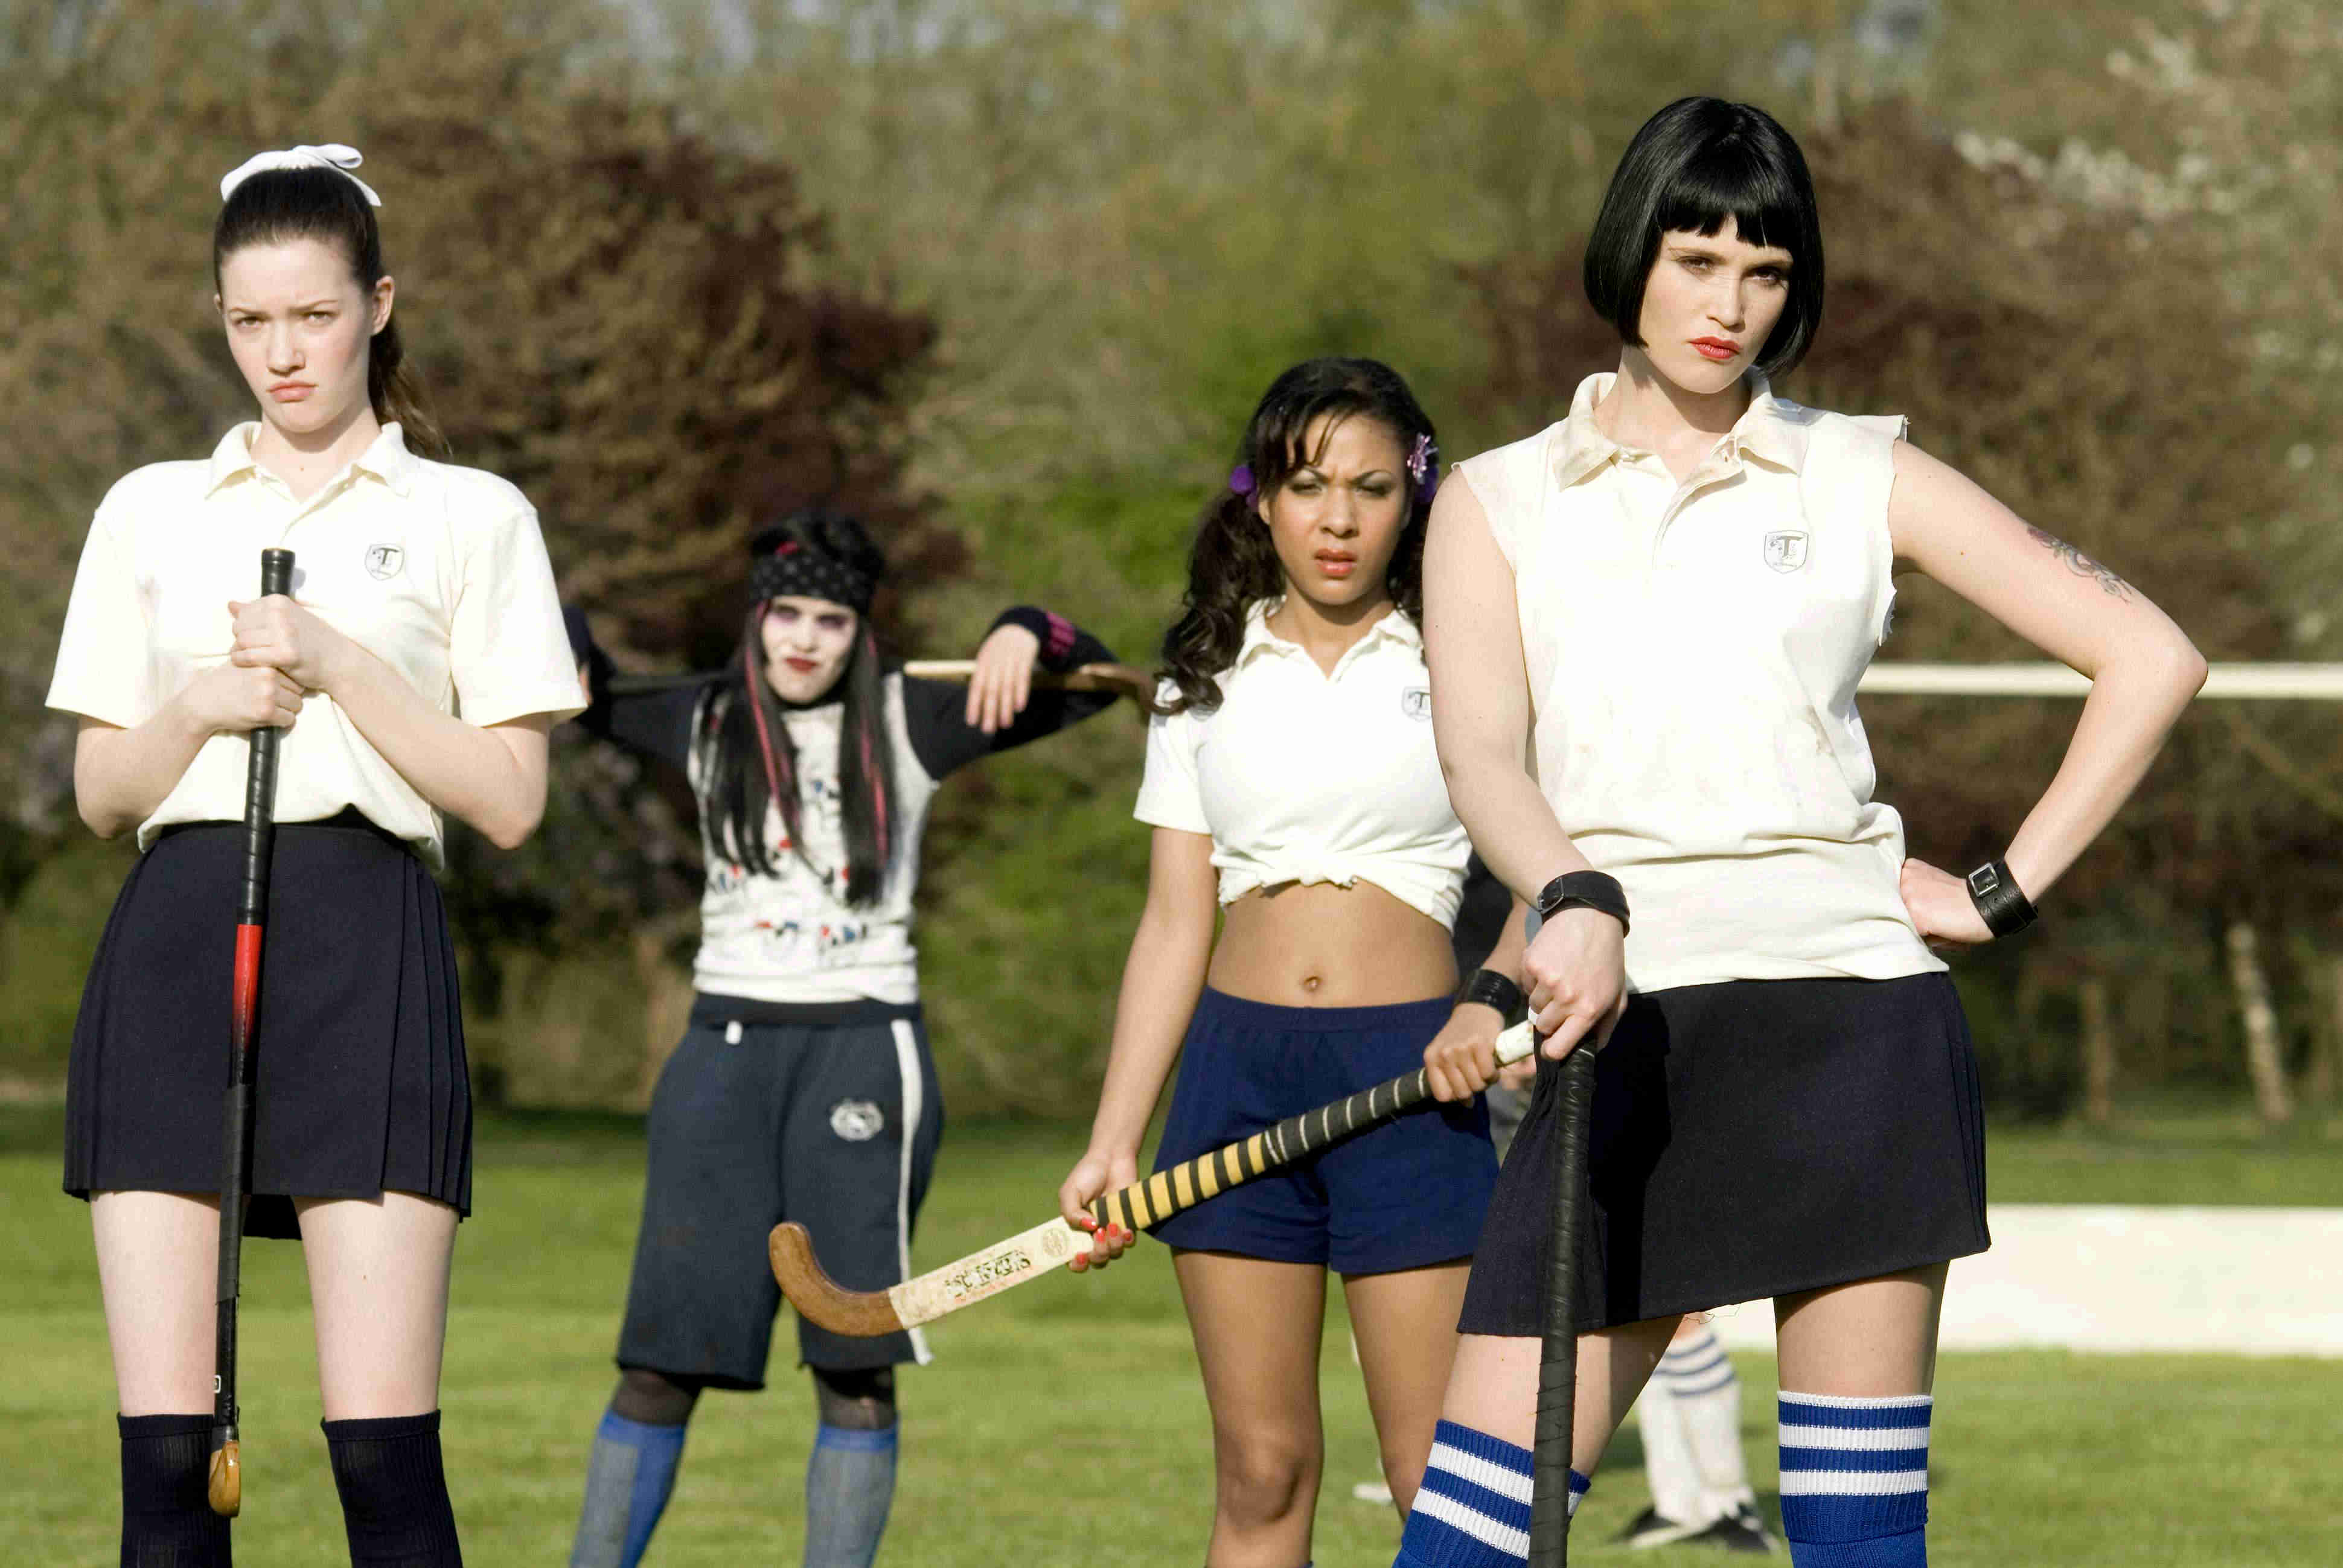 Talulah Riley stars as Annabelle Fritton and Gemma Arterton stars as Kelly in NeoClassics Films' St. Trinian's (2009)